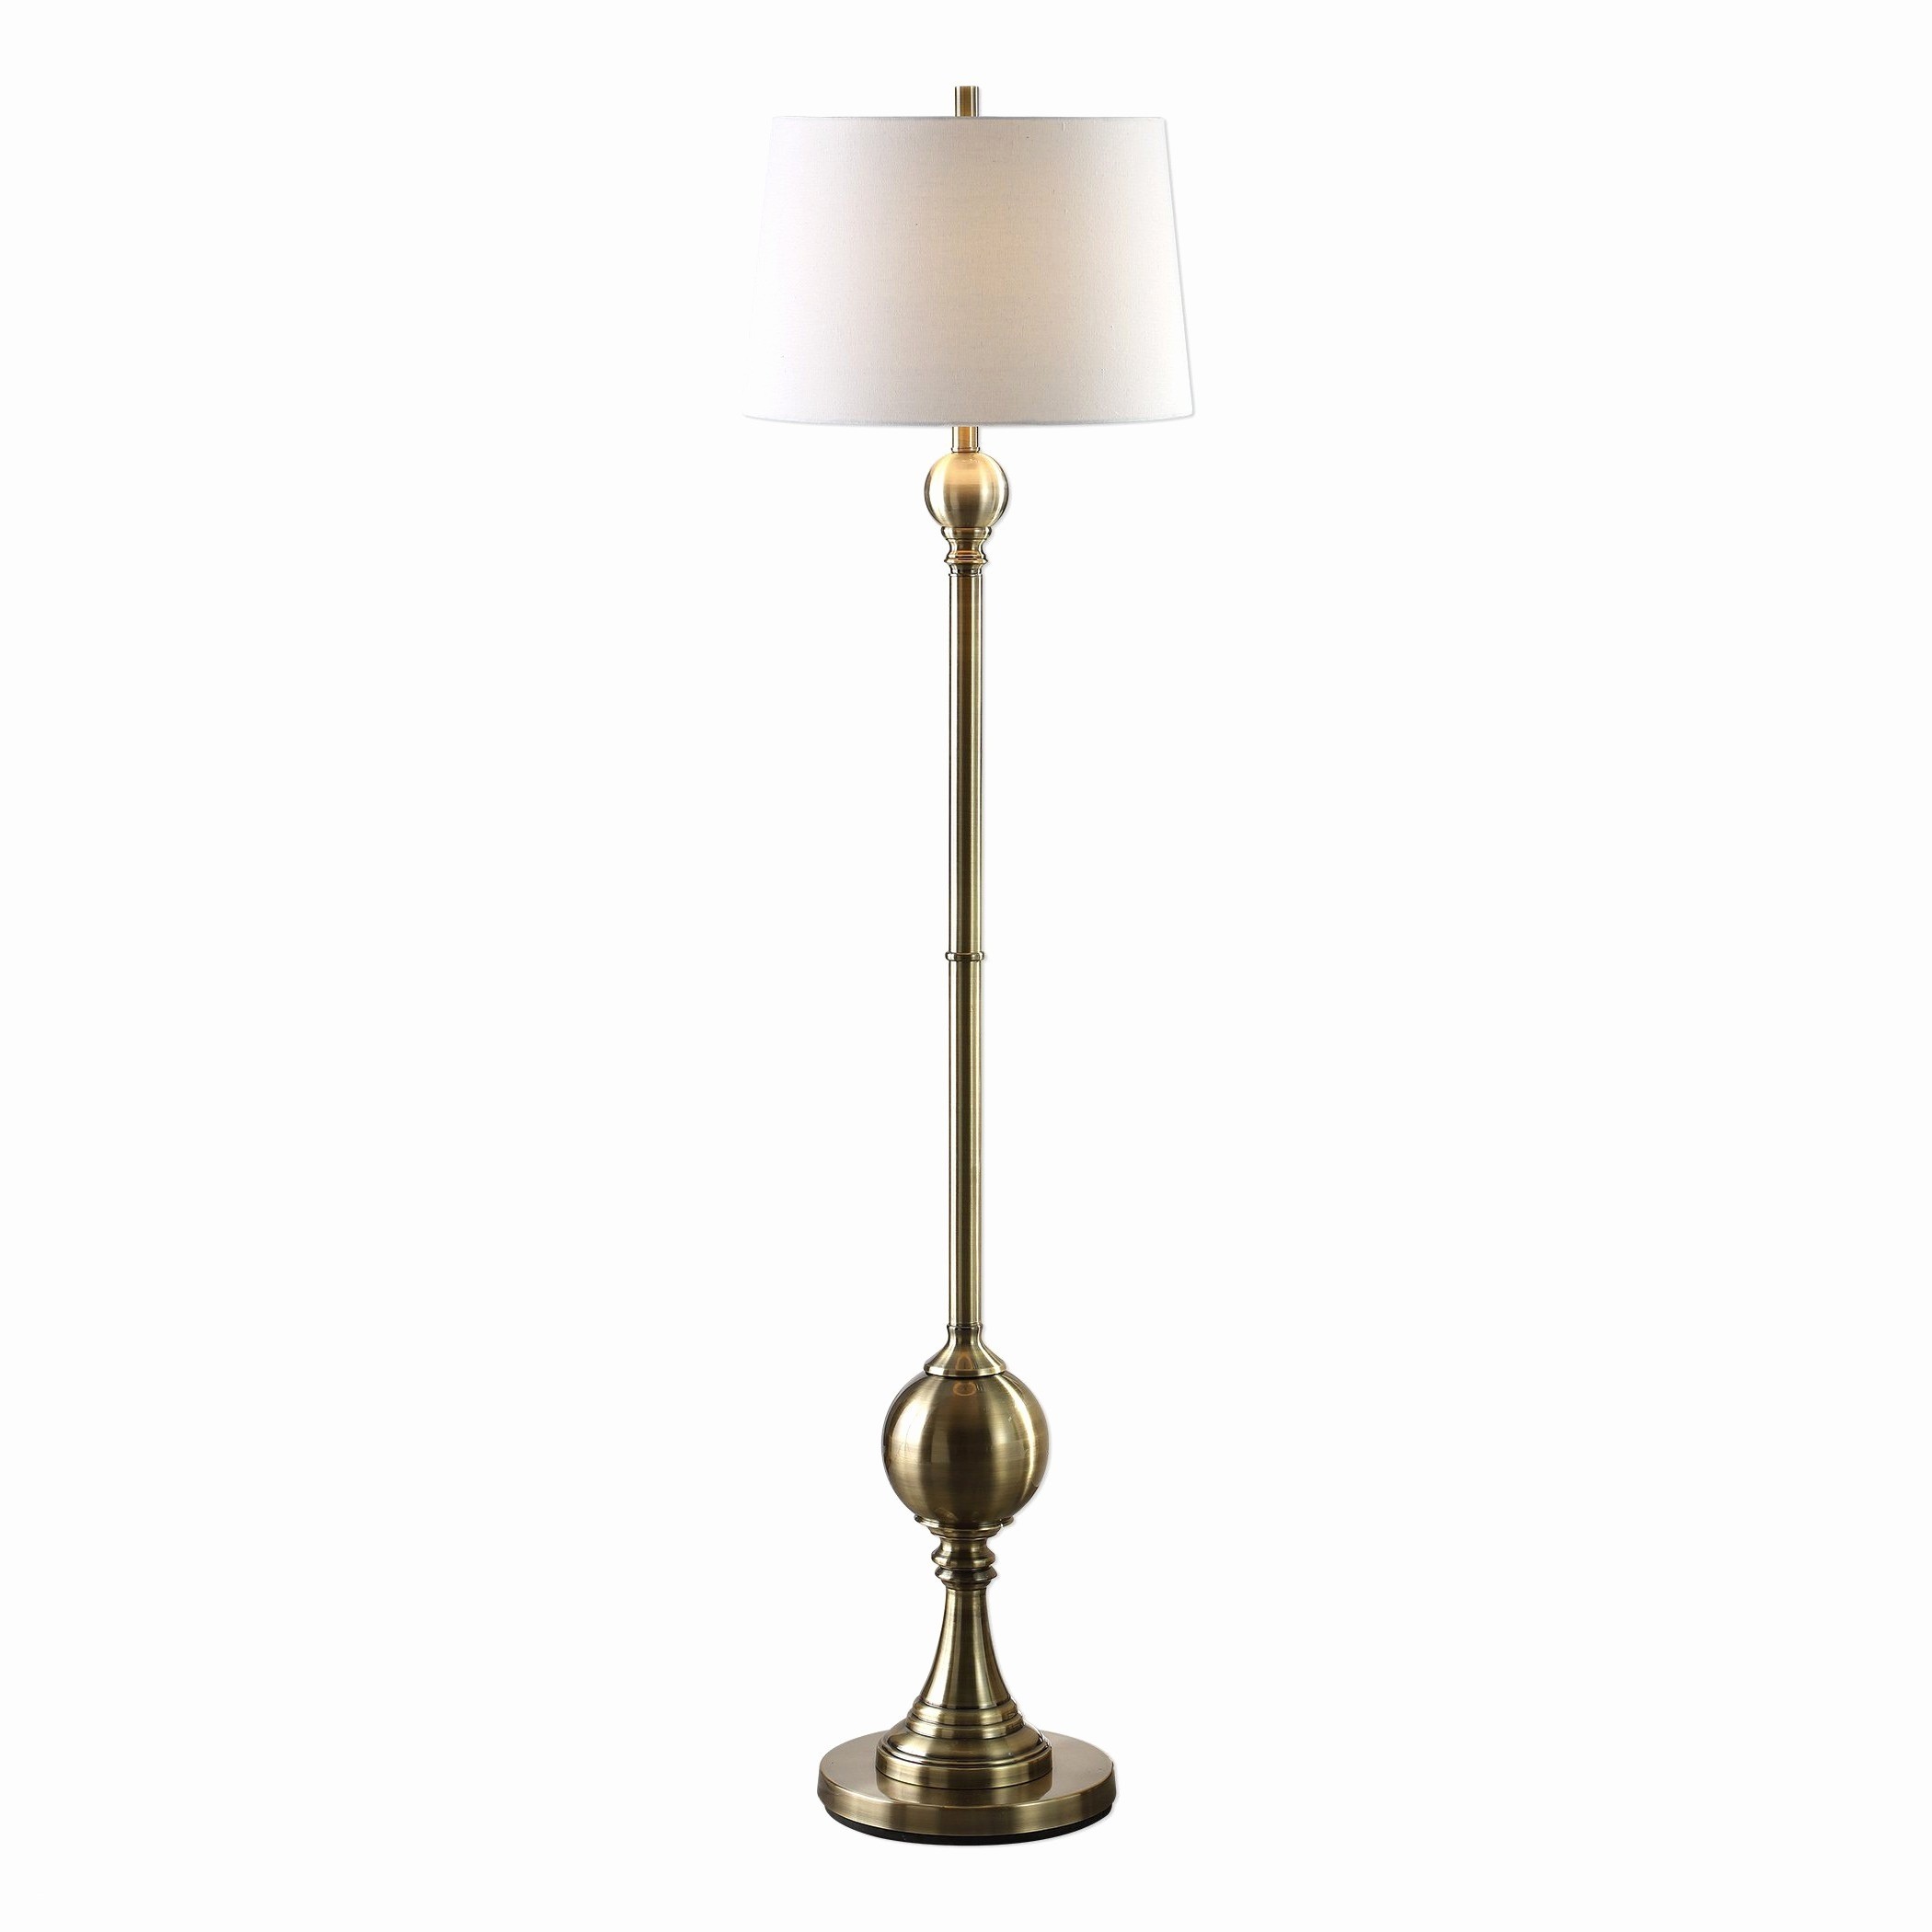 chandelier table lamp fresh winsome rustic dining room chandeliers extraordinary best butler designer edge accent stock lamps pier furniture tall skinny house decorating ideas